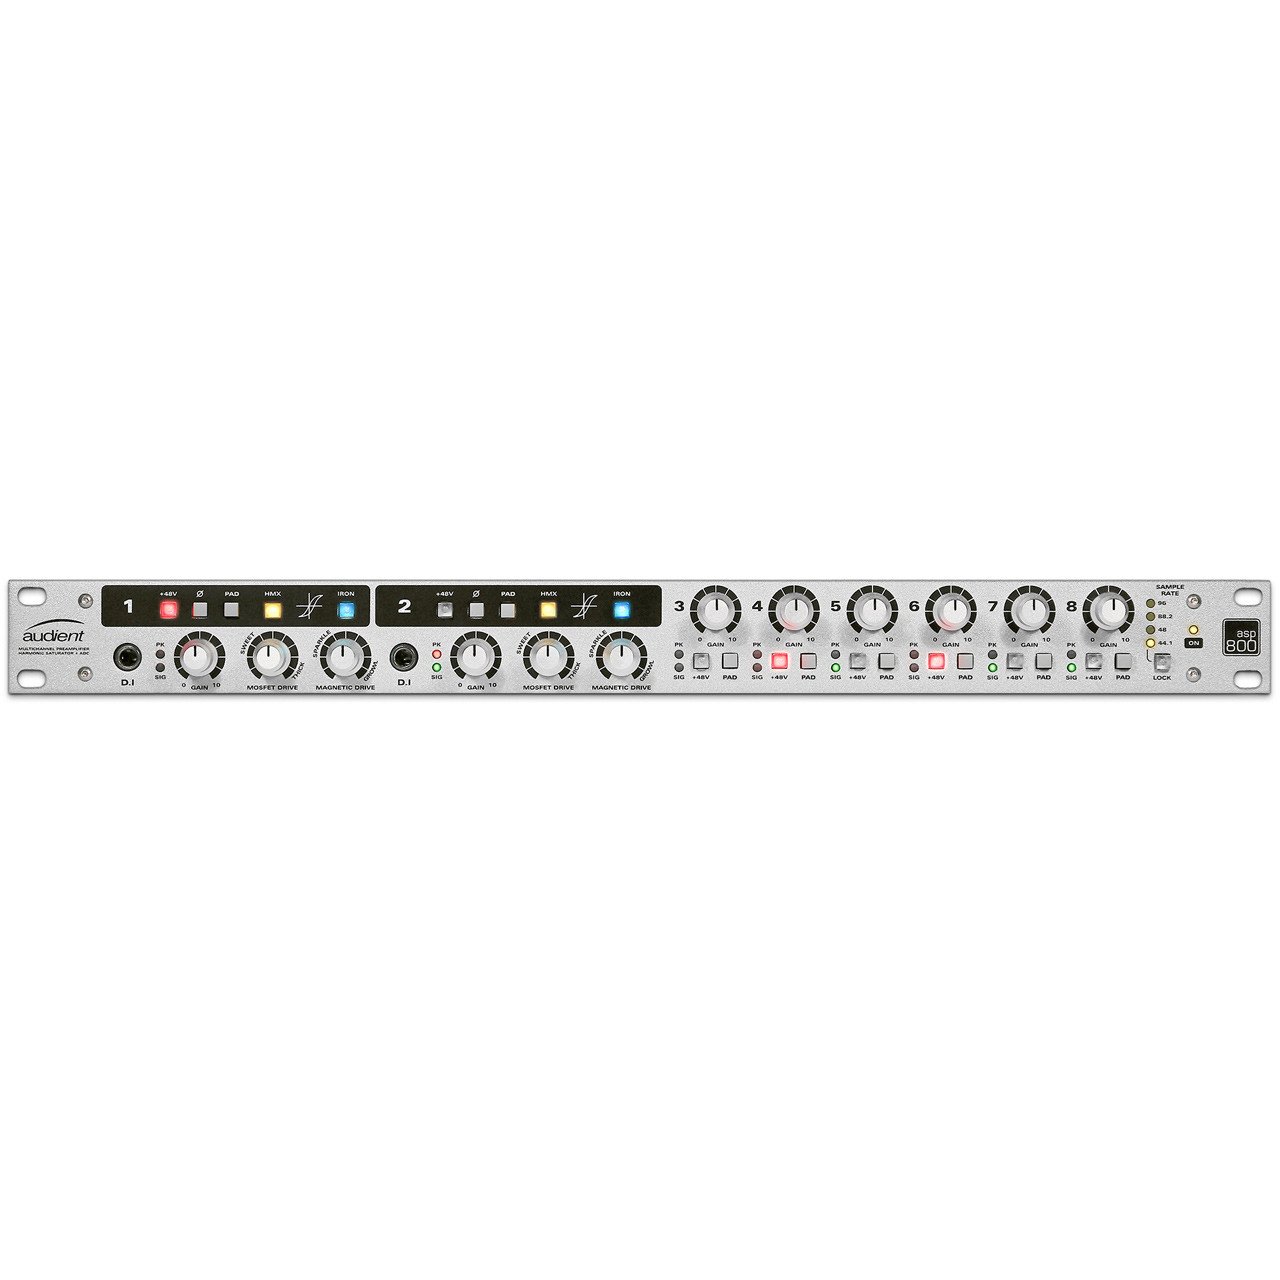 Preamps/Channel Strips - Audient ASP800 8 Channel Microphone Preamplifier And ADC